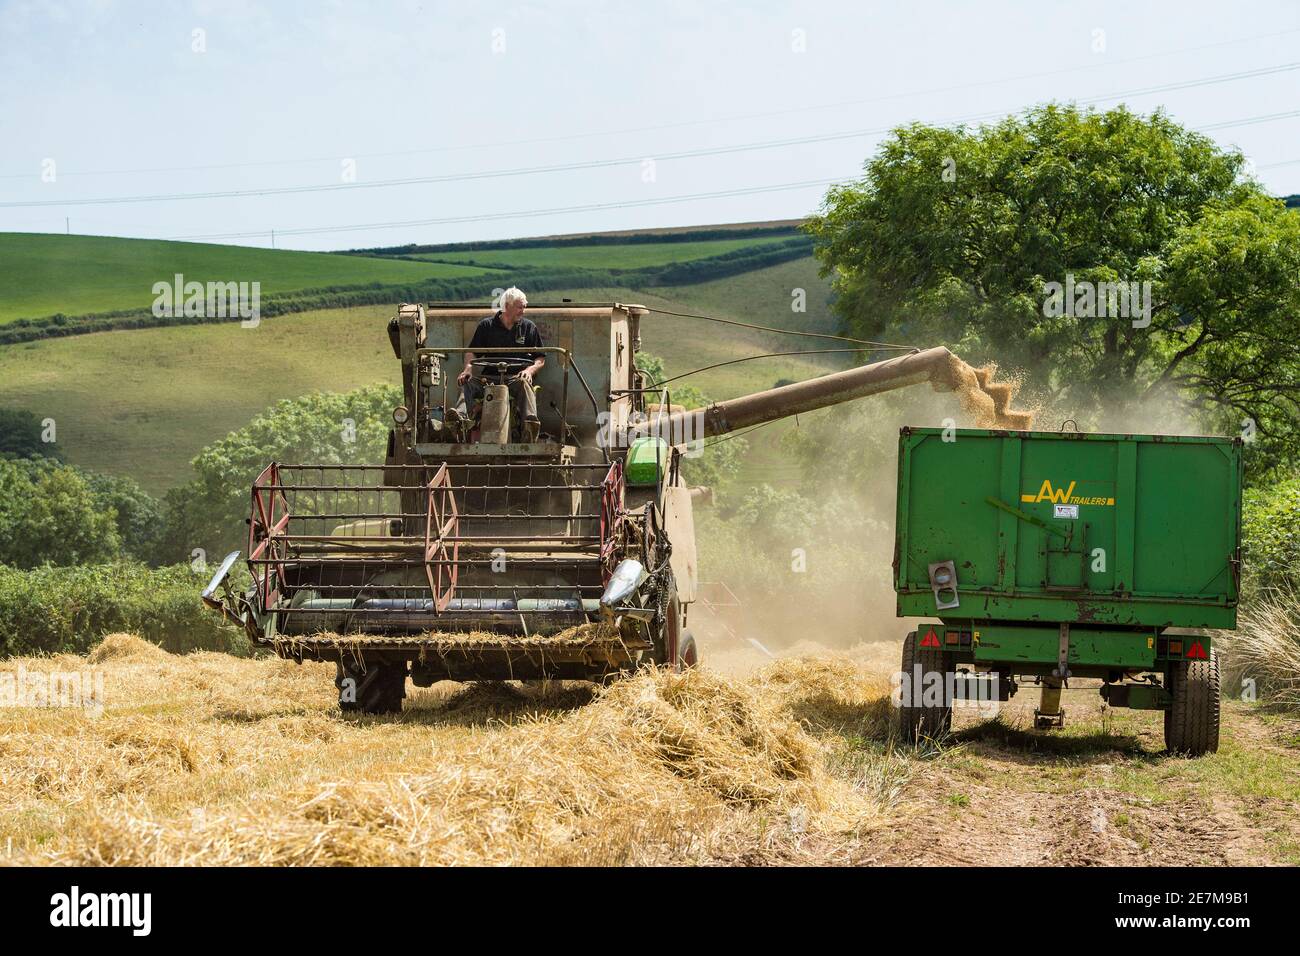 vintage claas matador combine harvester at work combining in the uk countryside Stock Photo